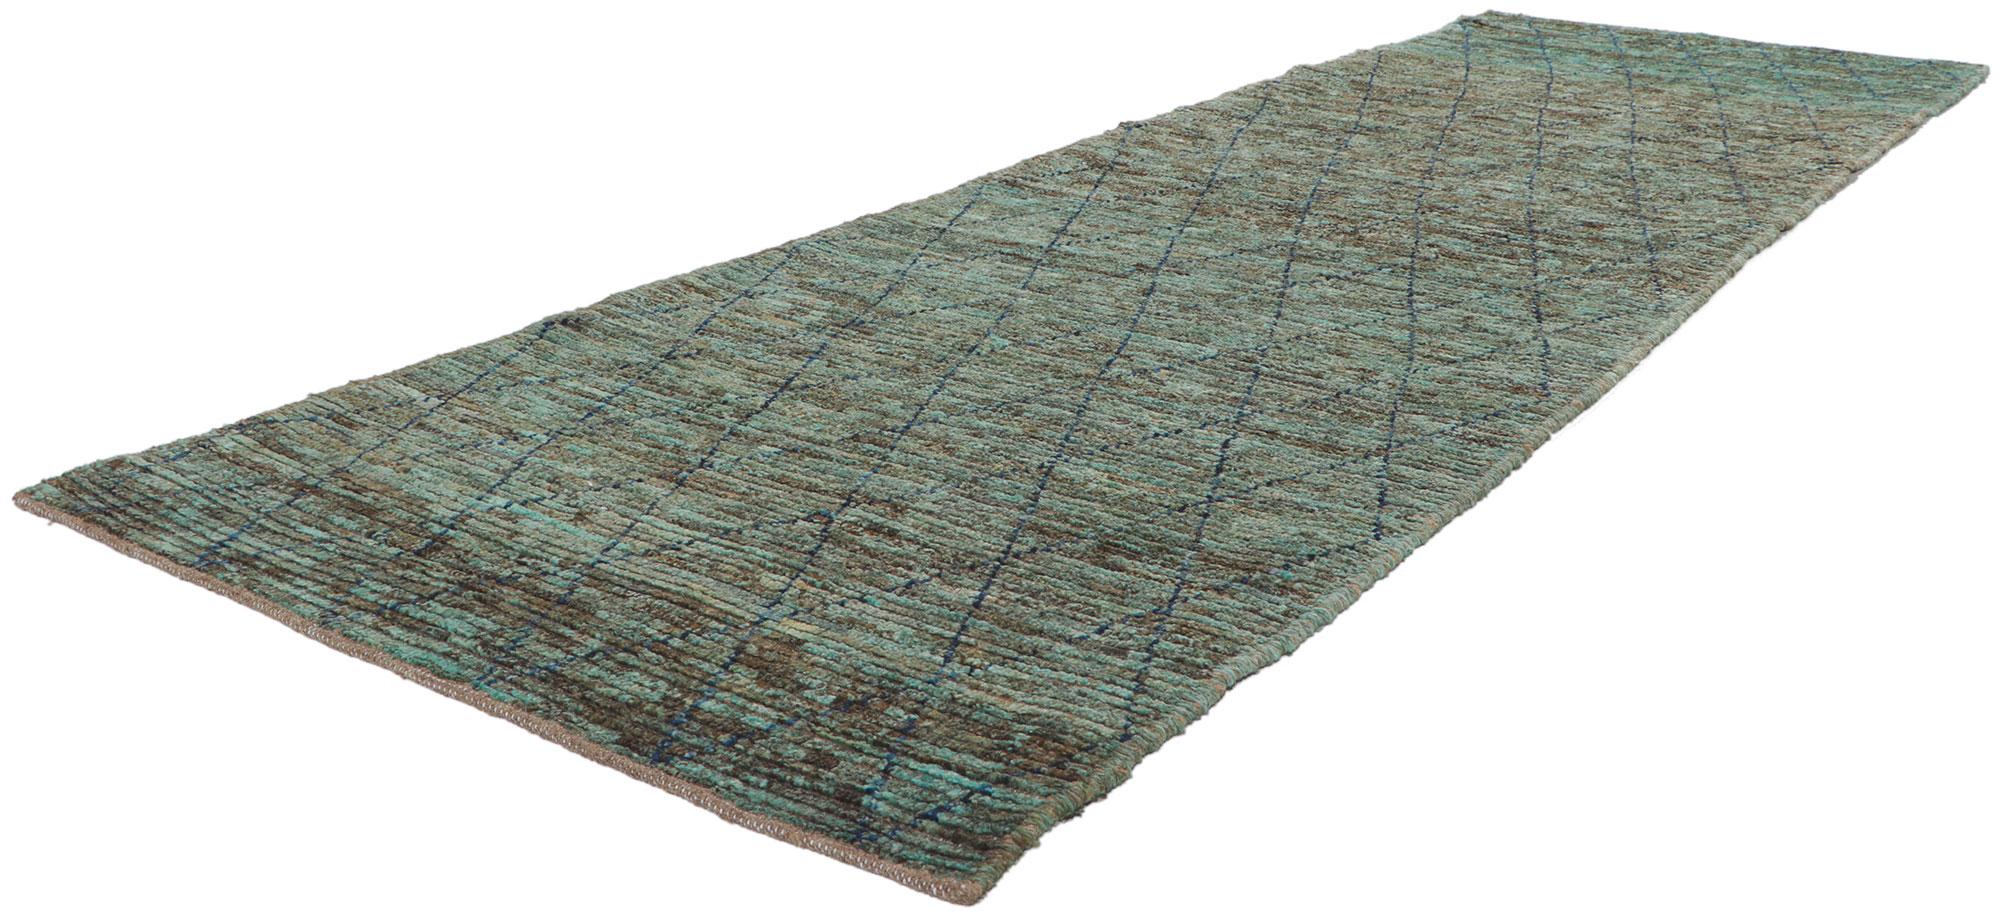 80762 New Contemporary Moroccan runner with Short Pile, 02'10 x 09'06. With its bohemian style, incredible detail and texture, this hand knotted wool contemporary Moroccan runner is a captivating vision of woven beauty. The tribal pattern and earthy